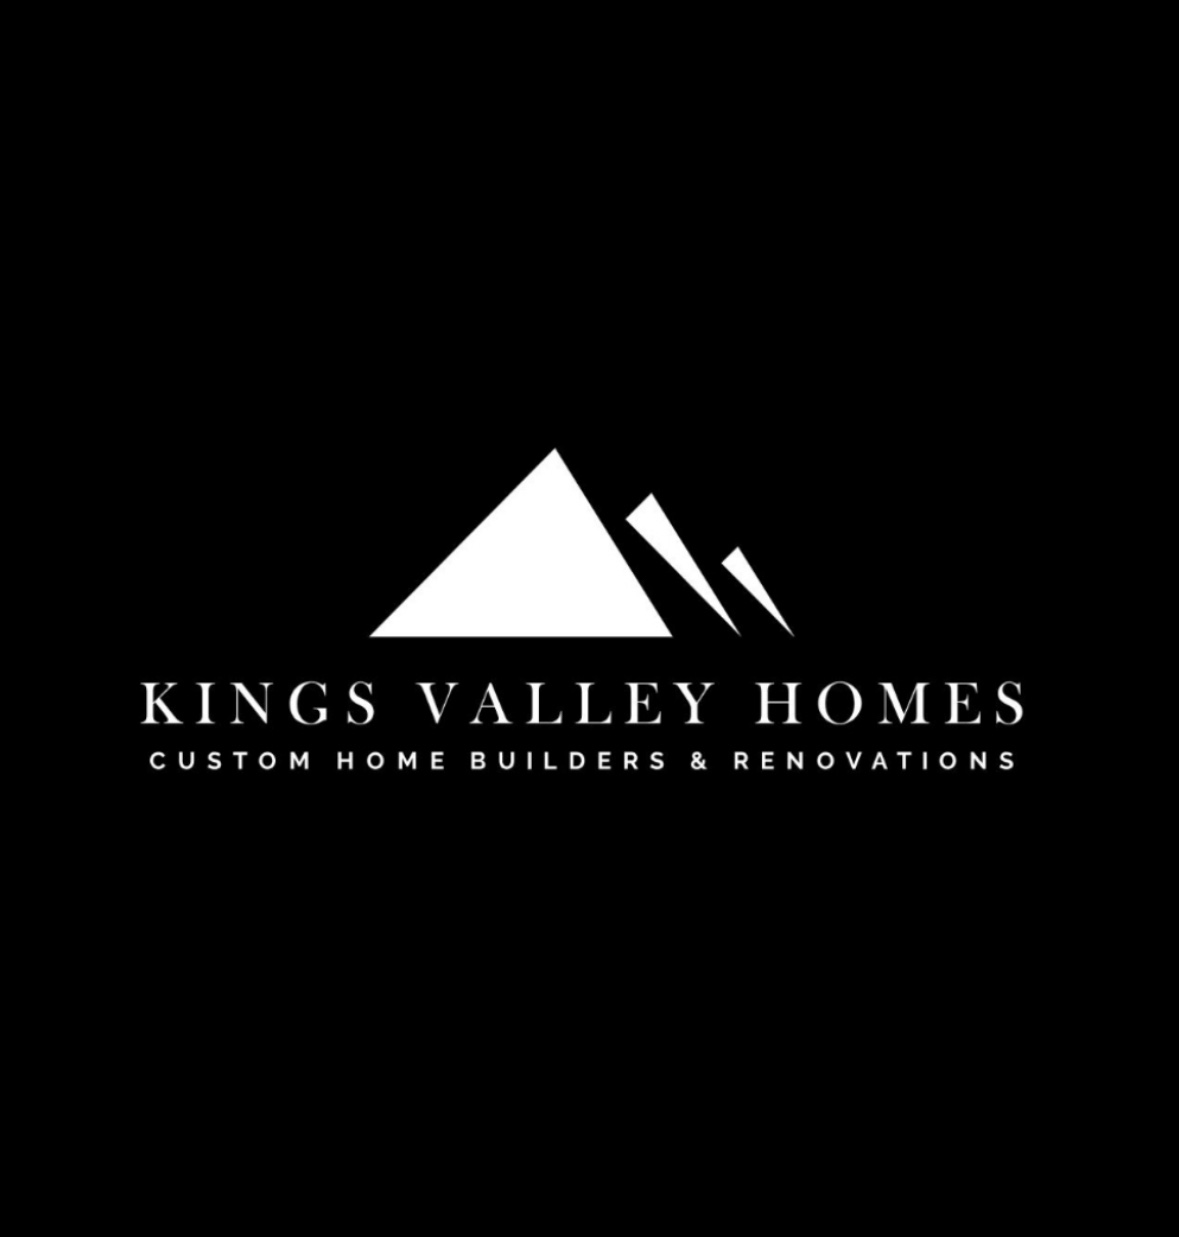 Kings Valley Homes Corp.'s logo